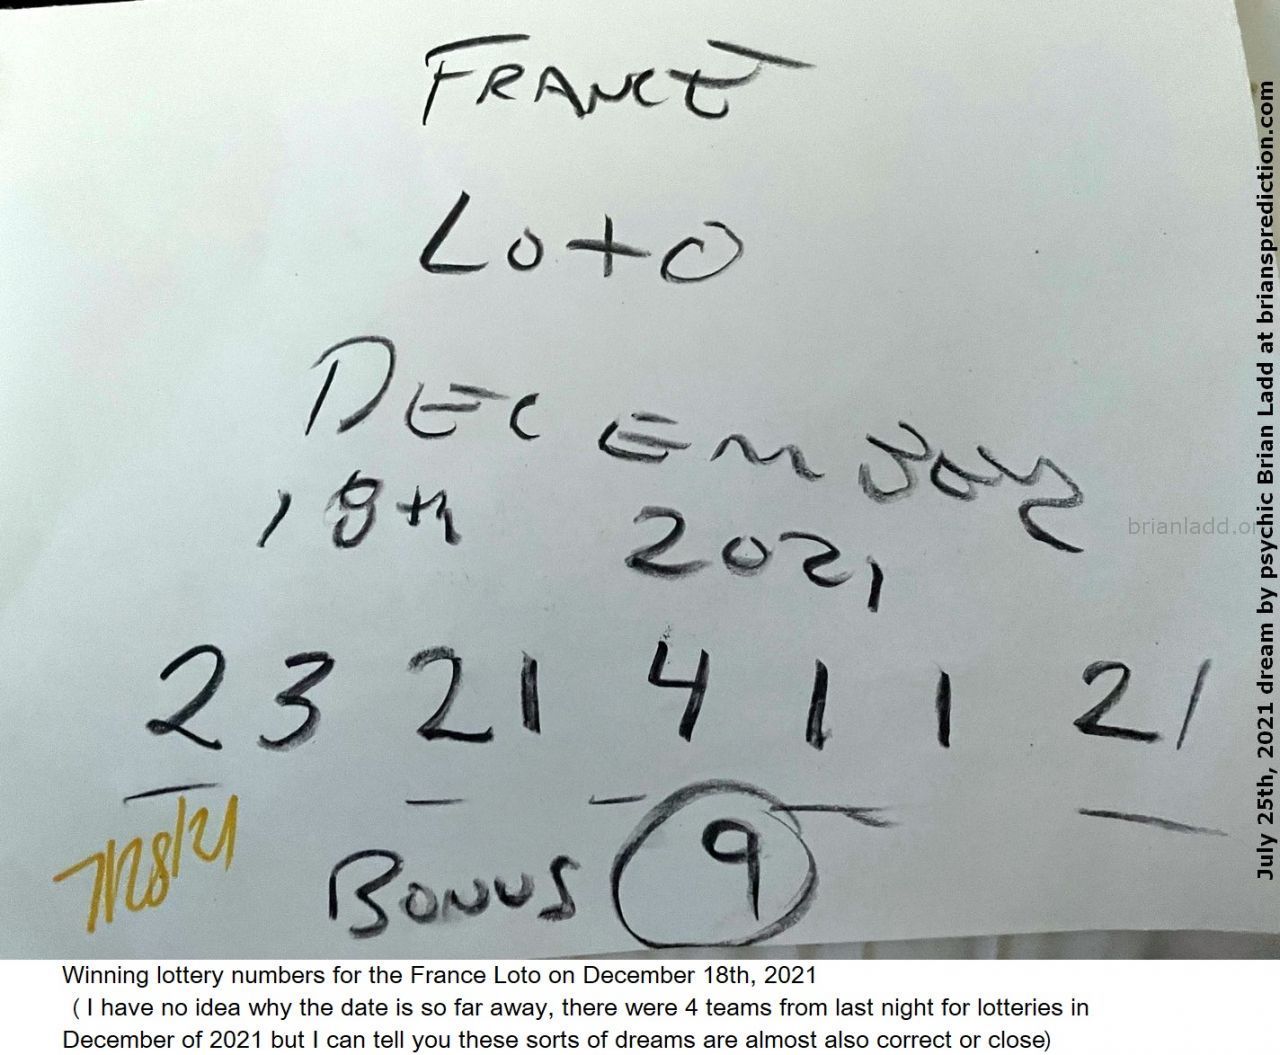 25 July 2021 1 Winning Lottery Numbers For The France Loto On December 18Th, 2021 - Winning lottery numbers for the Fra...
Winning lottery numbers for the France Loto on December 18th, 2021 (I have no idea why the date is so far away, there were 4 teams from last night for lotteries in December of 2021 but I can tell you these sorts of dreams are almost also correct or close)  ( NEW!  Free lottery picks by mail, I will personally fill out your blank lottery sheet and mail it back to you for free, postage is included!  visit  https://briansprediction.com/picksbymail   )
